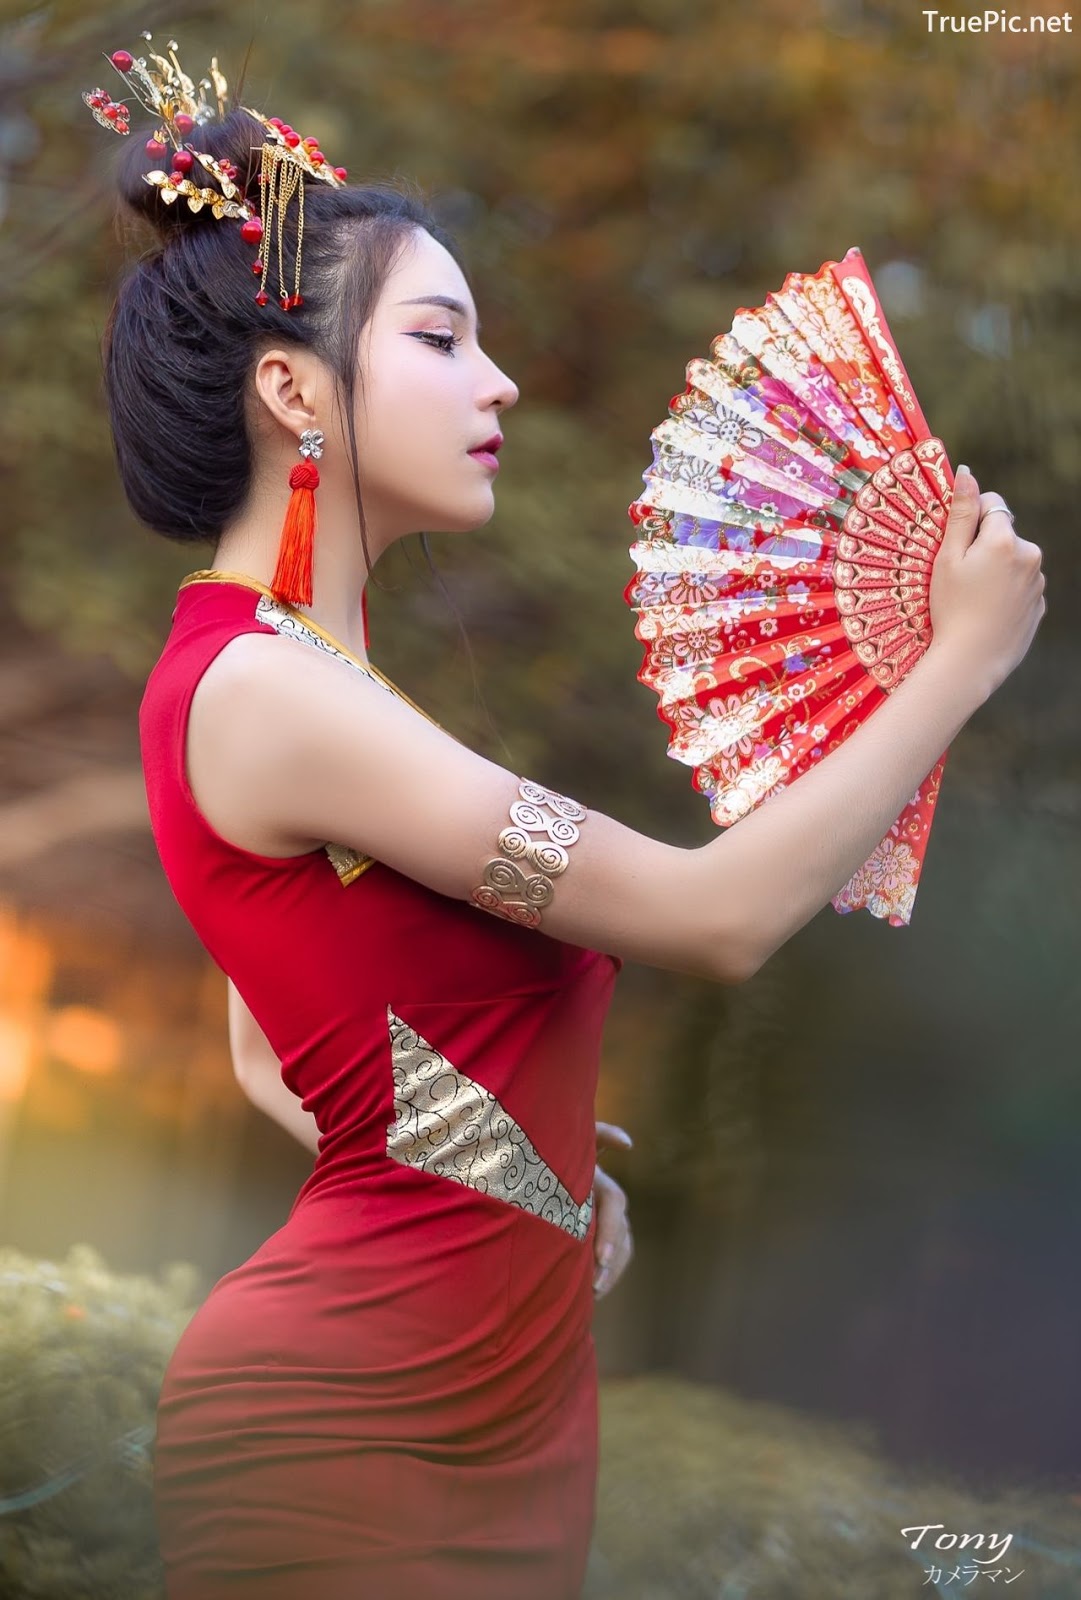 Image-Thailand-Hot-Model-Janet-Kanokwan-Saesim-Sexy-Chinese-Girl-Red-Dress-Traditional-TruePic.net- Picture-38